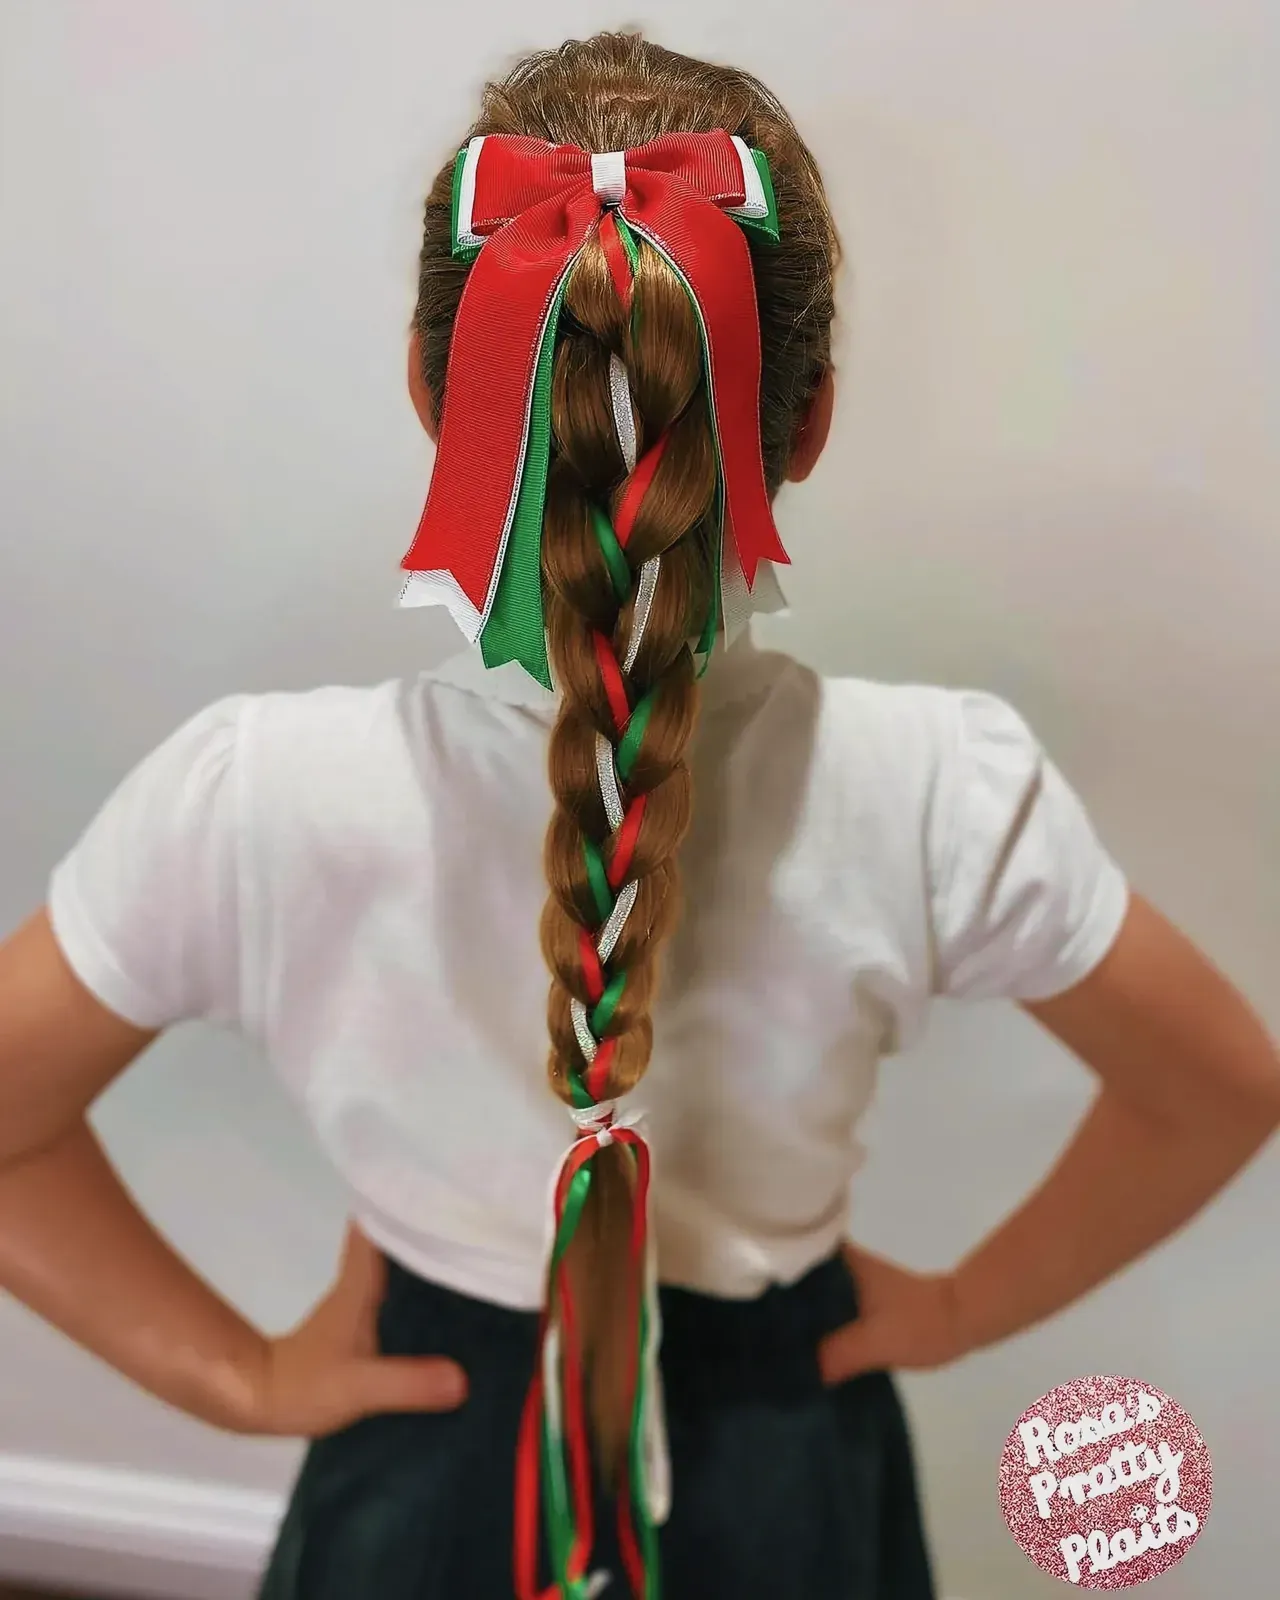 Girl with festive ribbon hairstyle